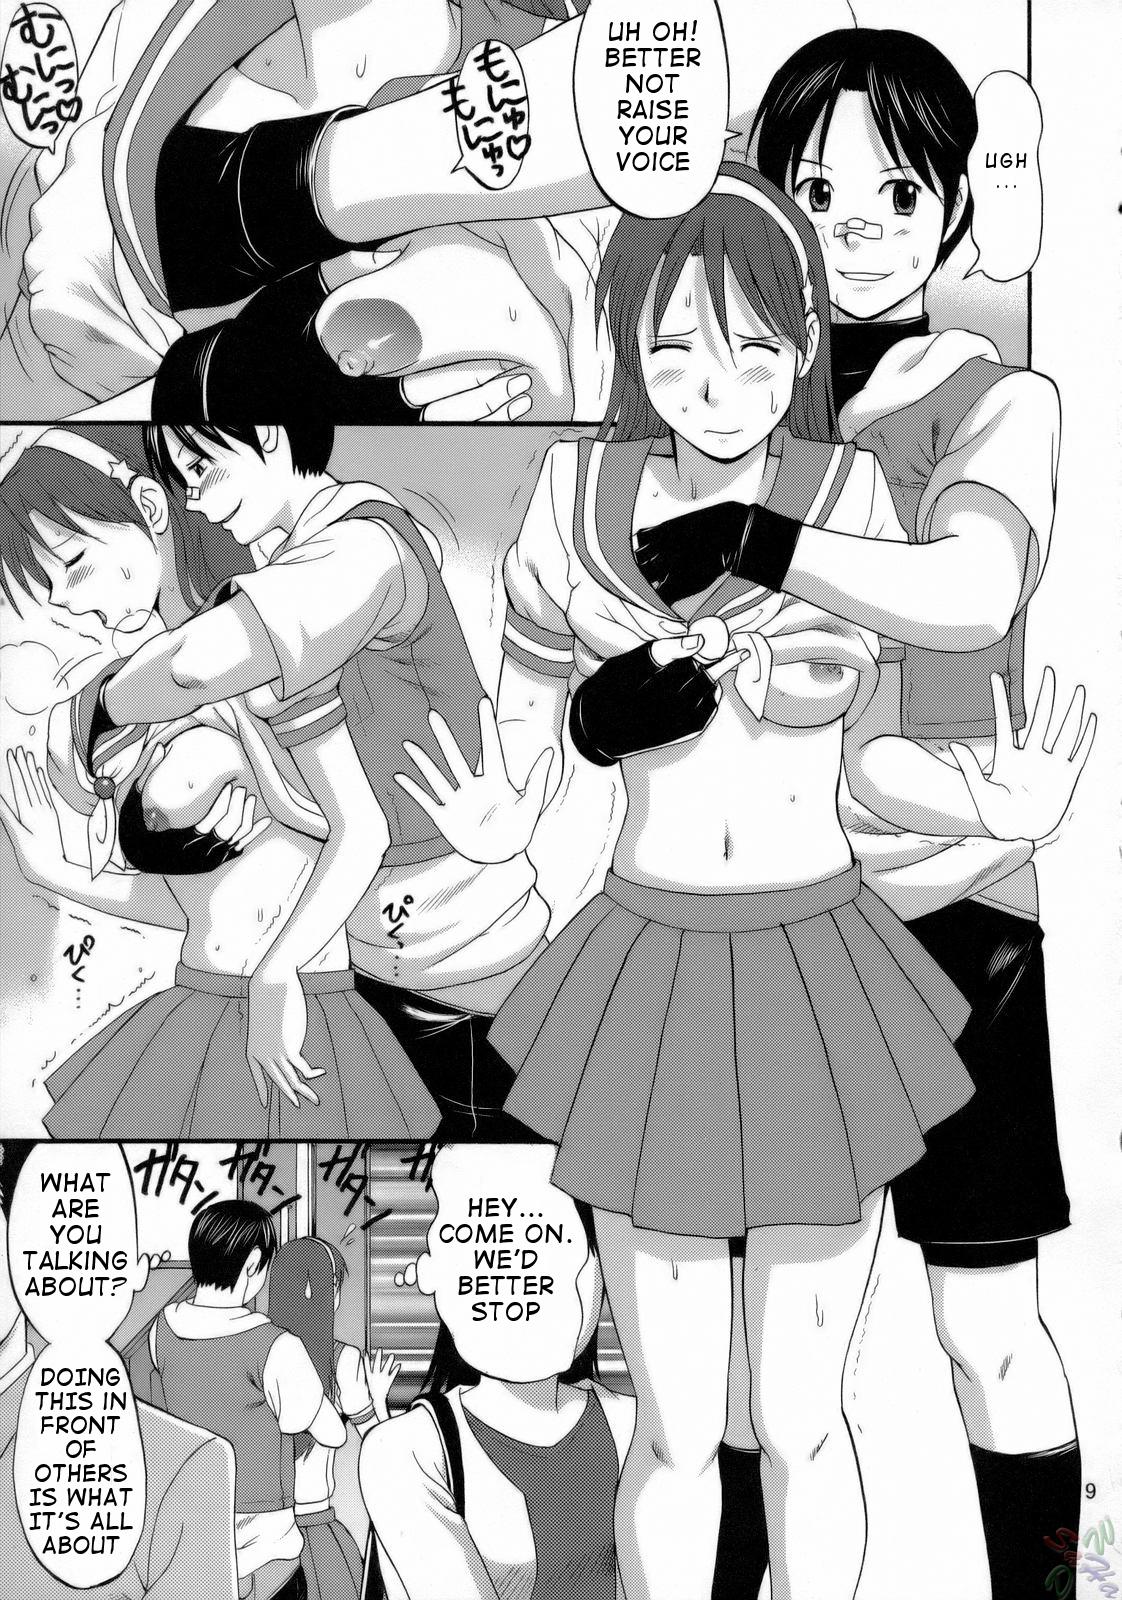 Animated THE ATHENA & FRIENDS 2006 - King of fighters Chubby - Page 8